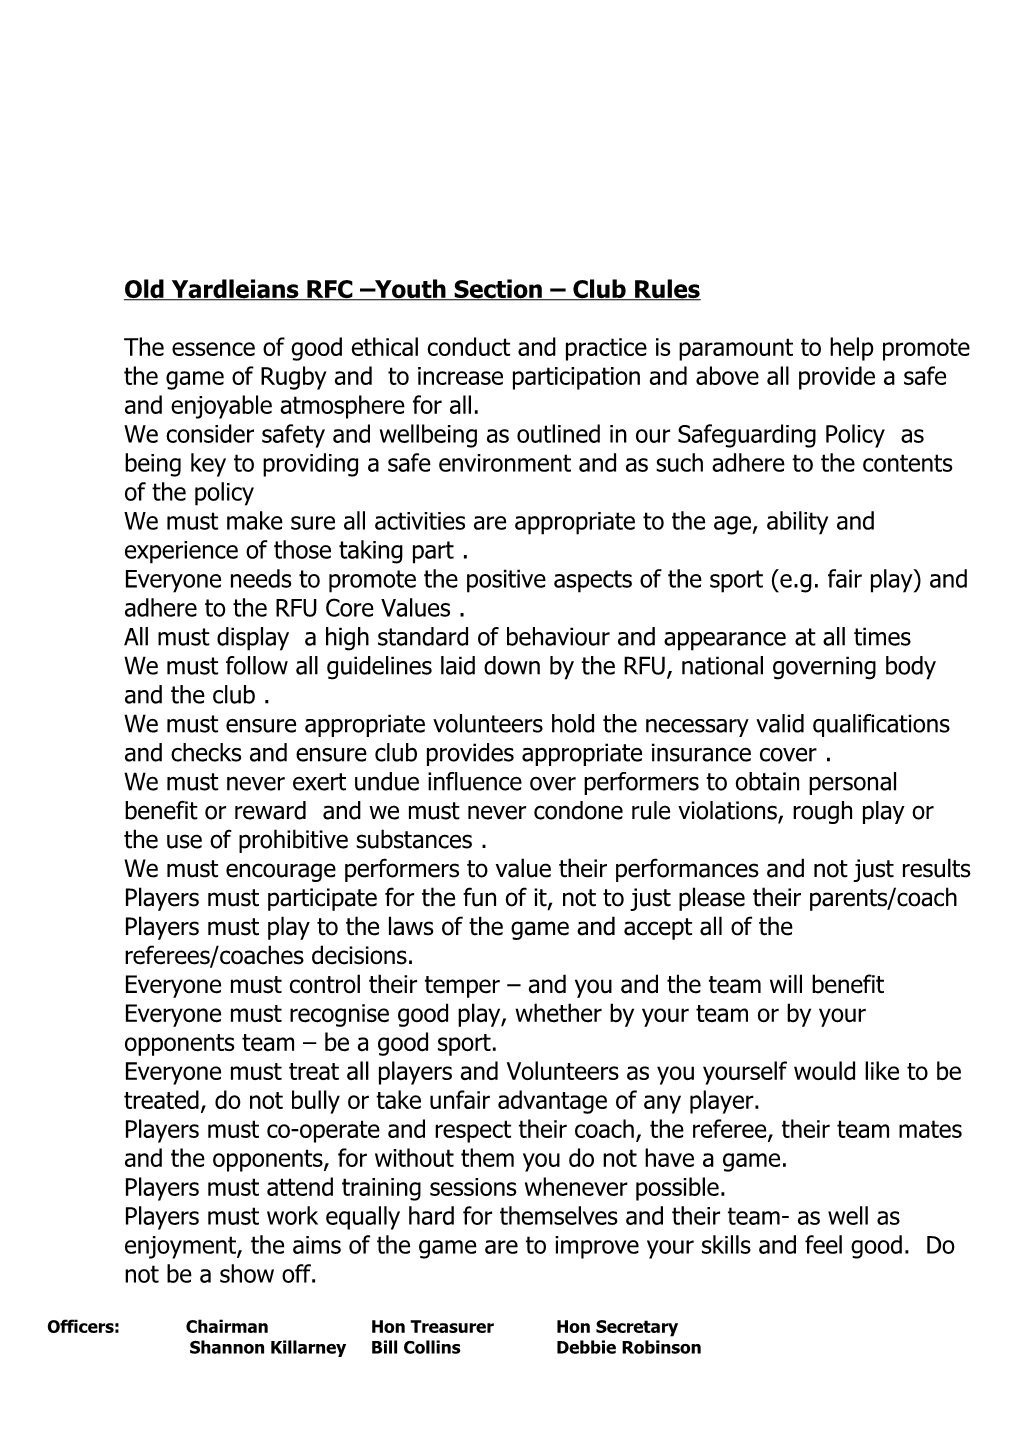 Old Yardleians RFC Youth Section Club Rules